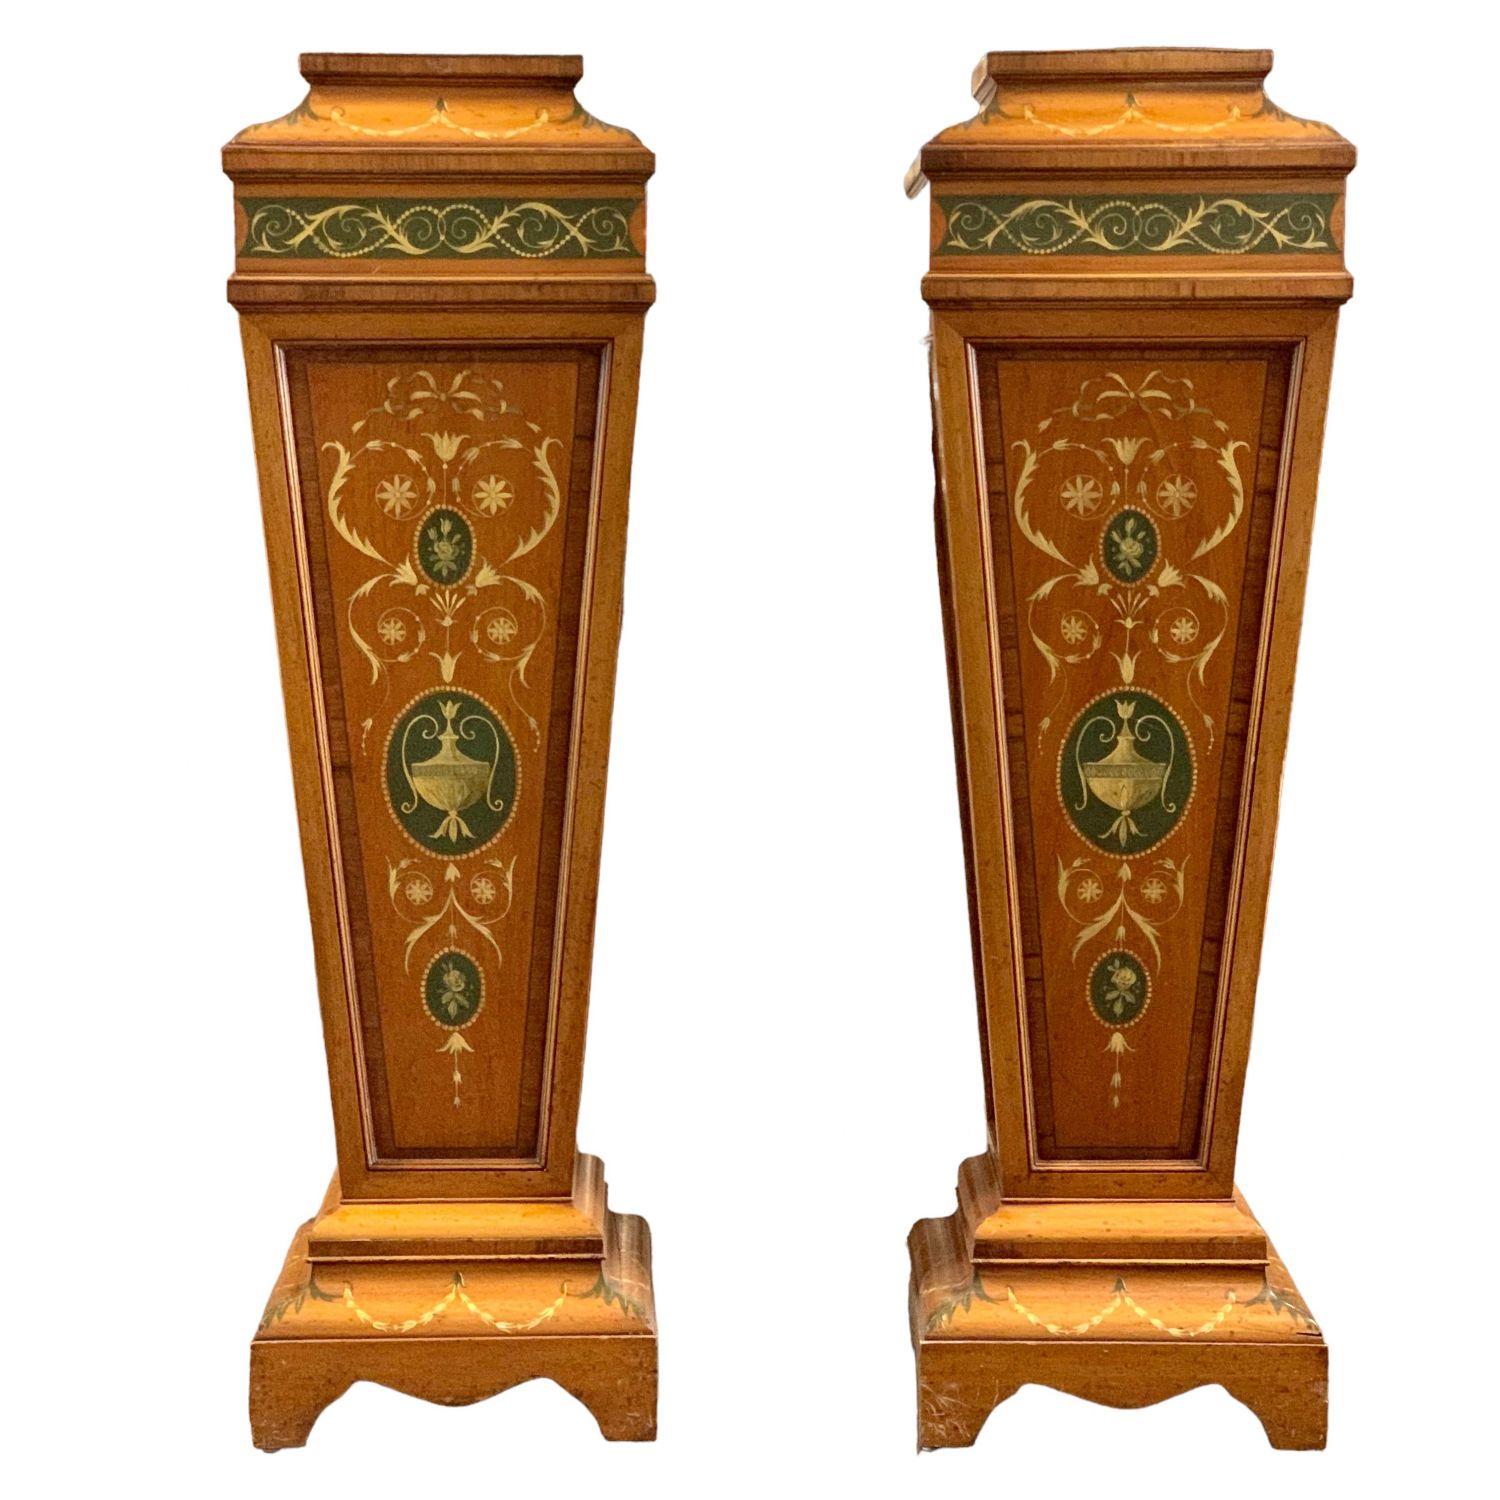 The quality pedestals with highly figured satinwood, and finely detailed painting suggests the production of a top London cabinet-maker.
English Edwardian period Satinwood pedestals with cross banding and original floral hand painted decoration to